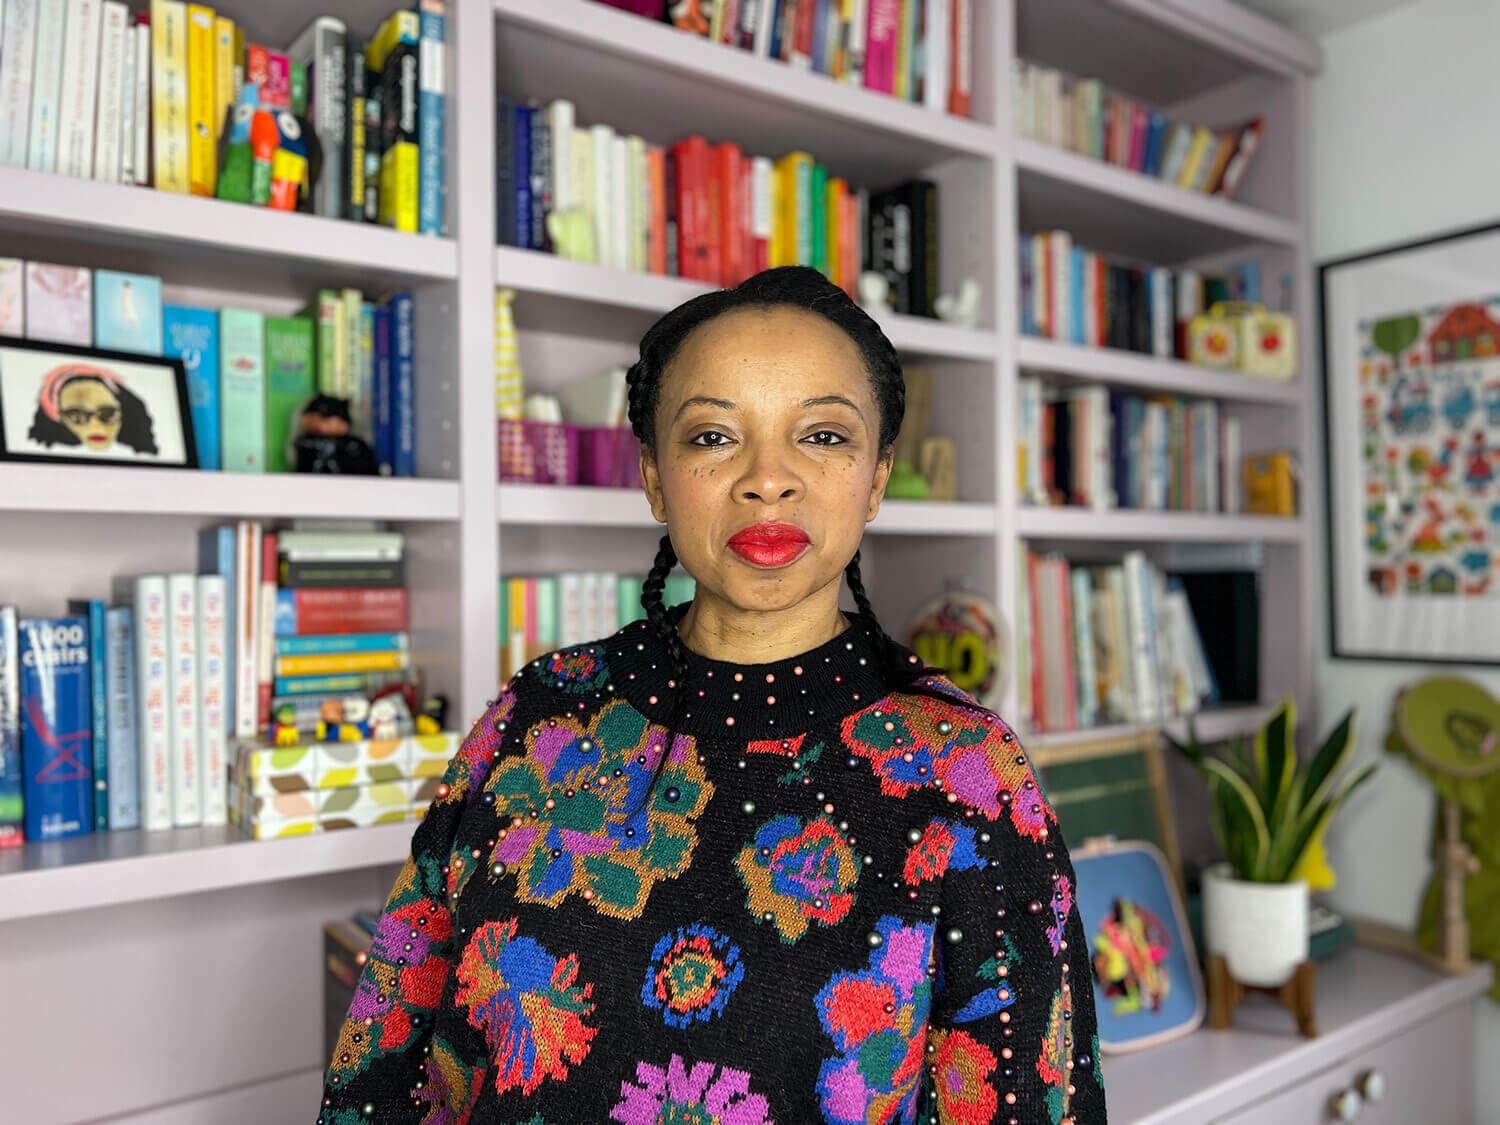 Natalie Lue standing in her studio with her books in the background wearing a Farm Rio jumper, red lipstick, and with her hair in two braids